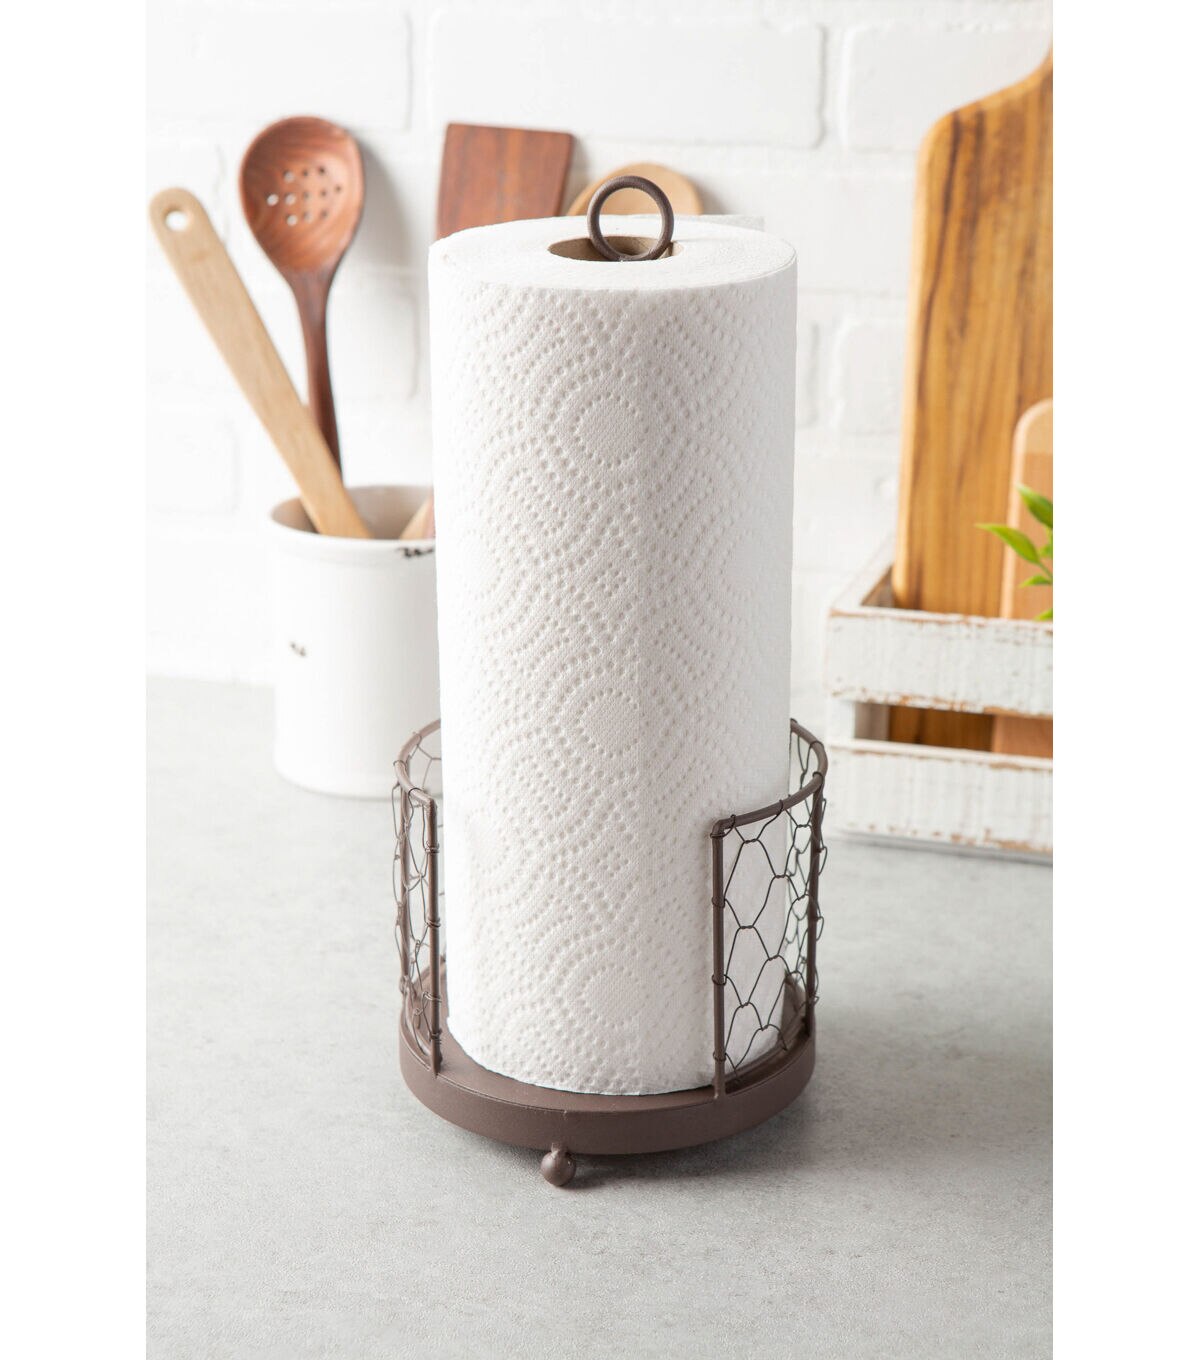 Rustic Classic Early American Chicken Wire Toilet Tissue Holder Available Now 